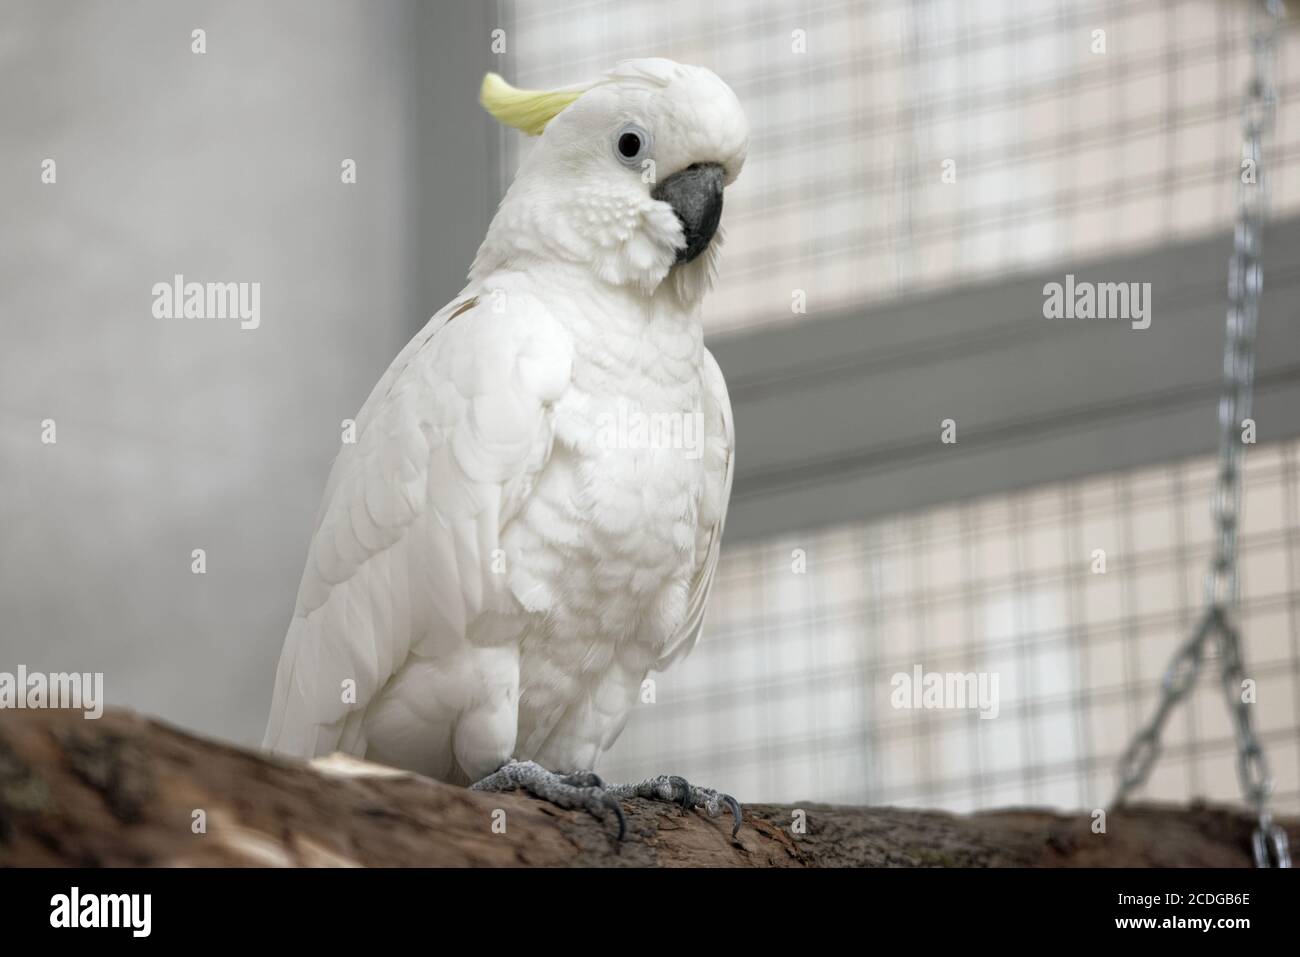 Yellow-crested cockatoo parrot in a cage Stock Photo